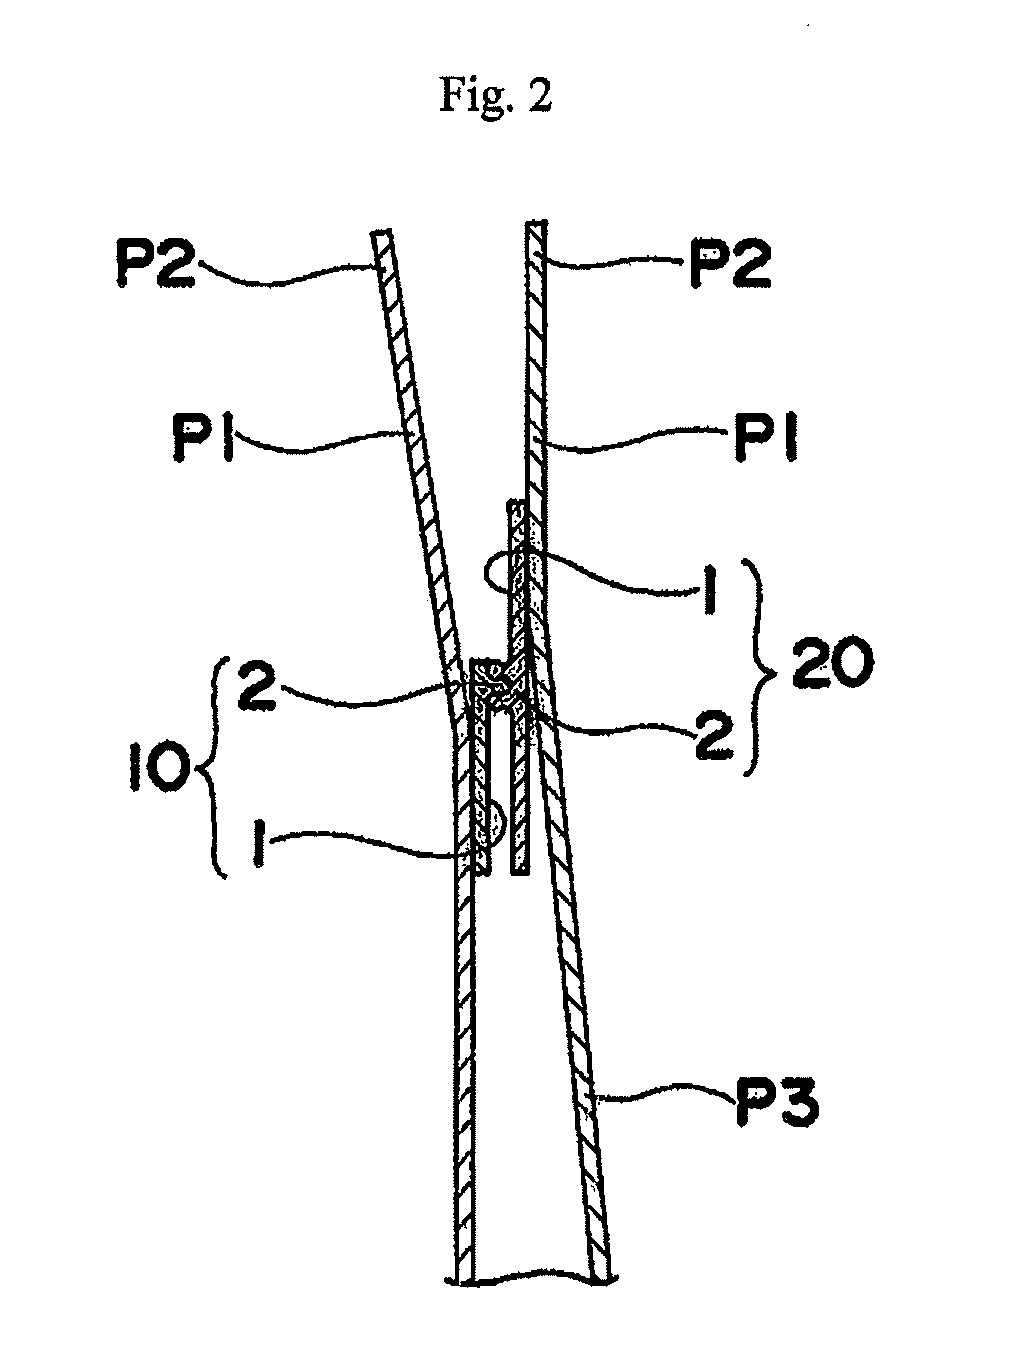 Child-resistant zipper and packaging bag incorporating said zipper